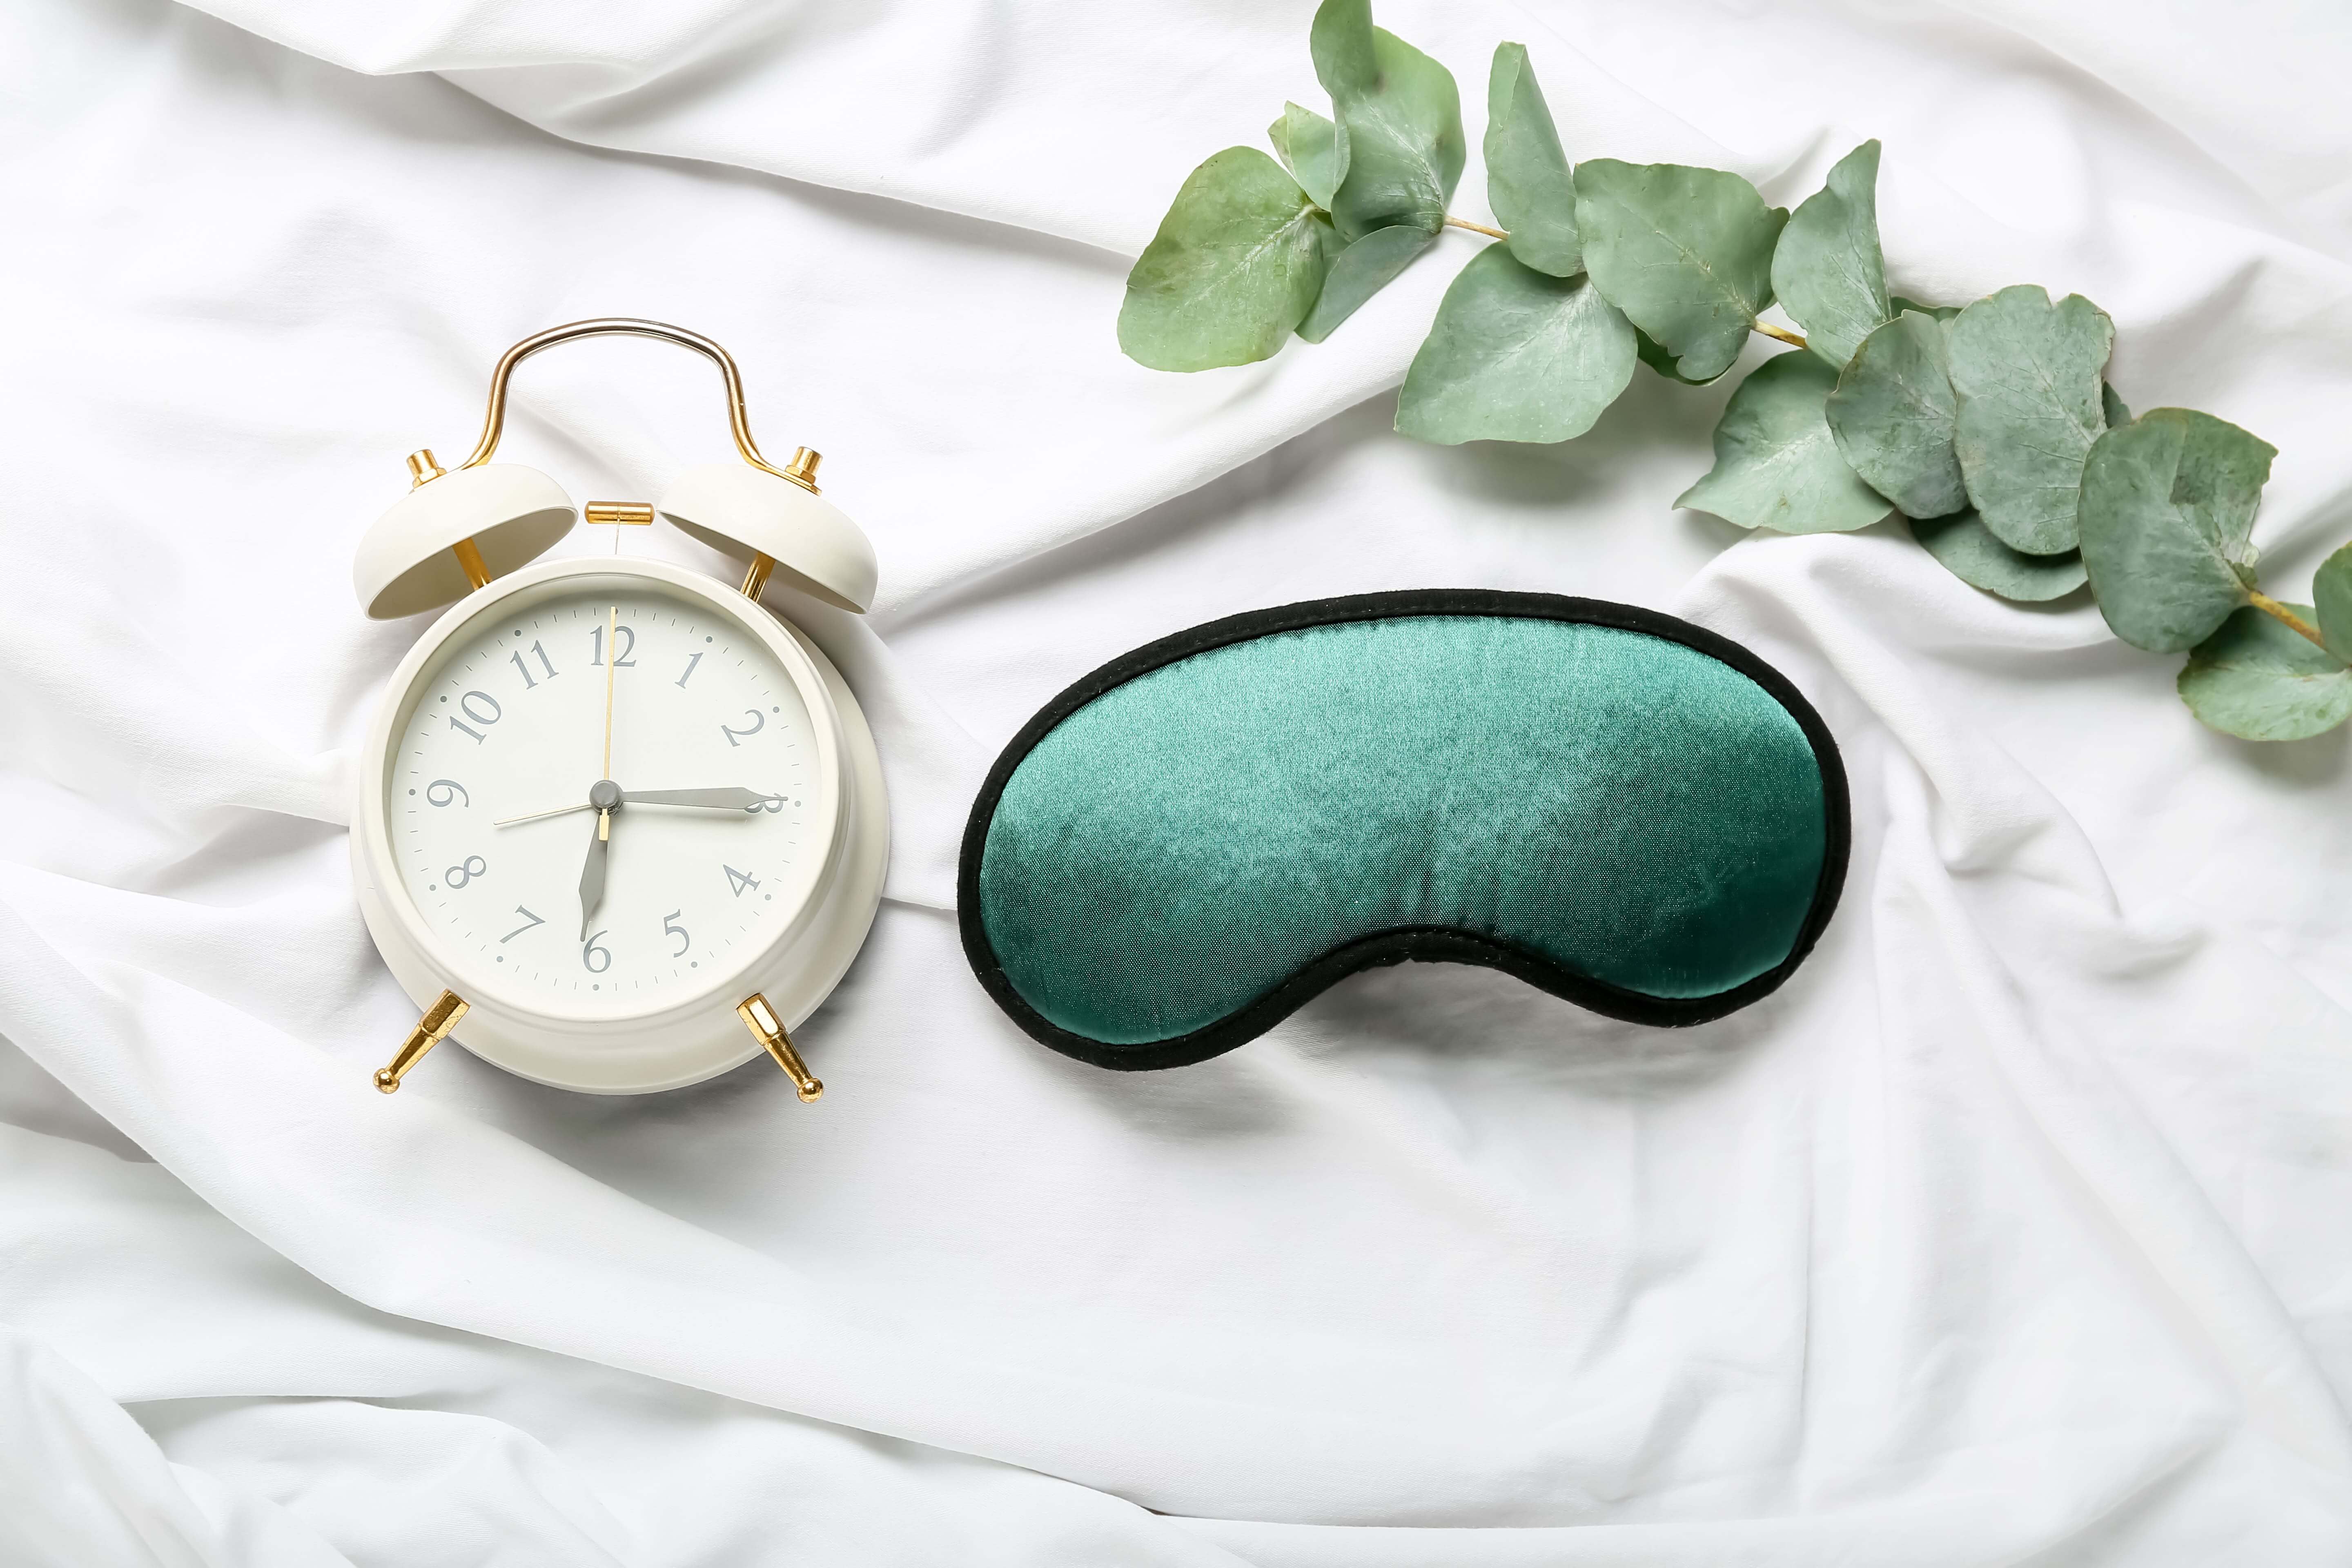 Alarm and Eye mask on Bed Sheets